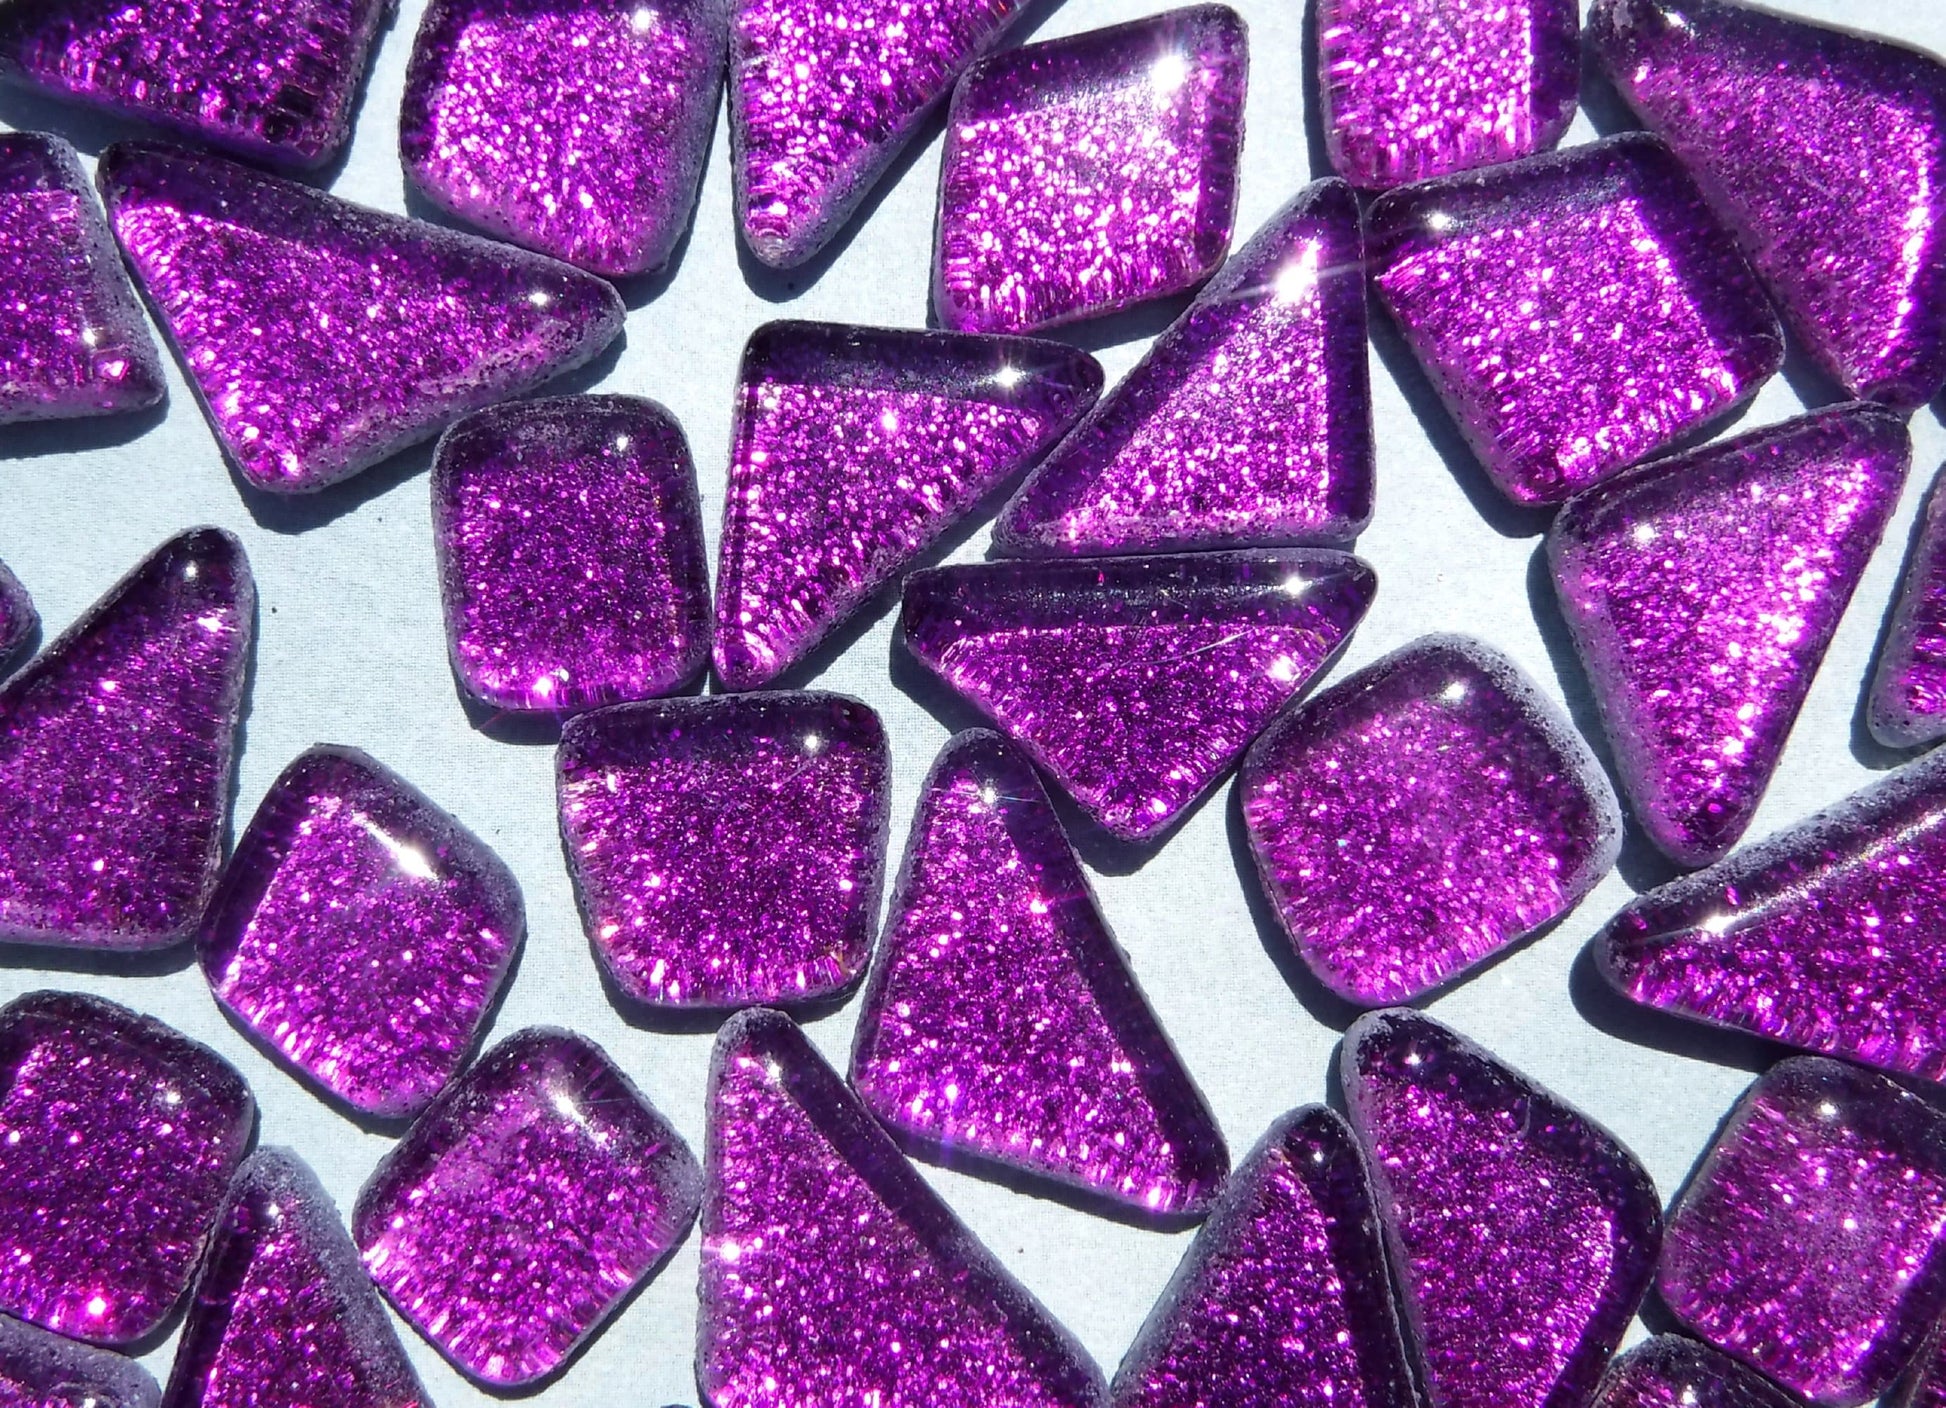 Dark Purple Glitter Puzzle Tiles - 100 grams in Assorted Shapes - Glass Mosaic Tiles